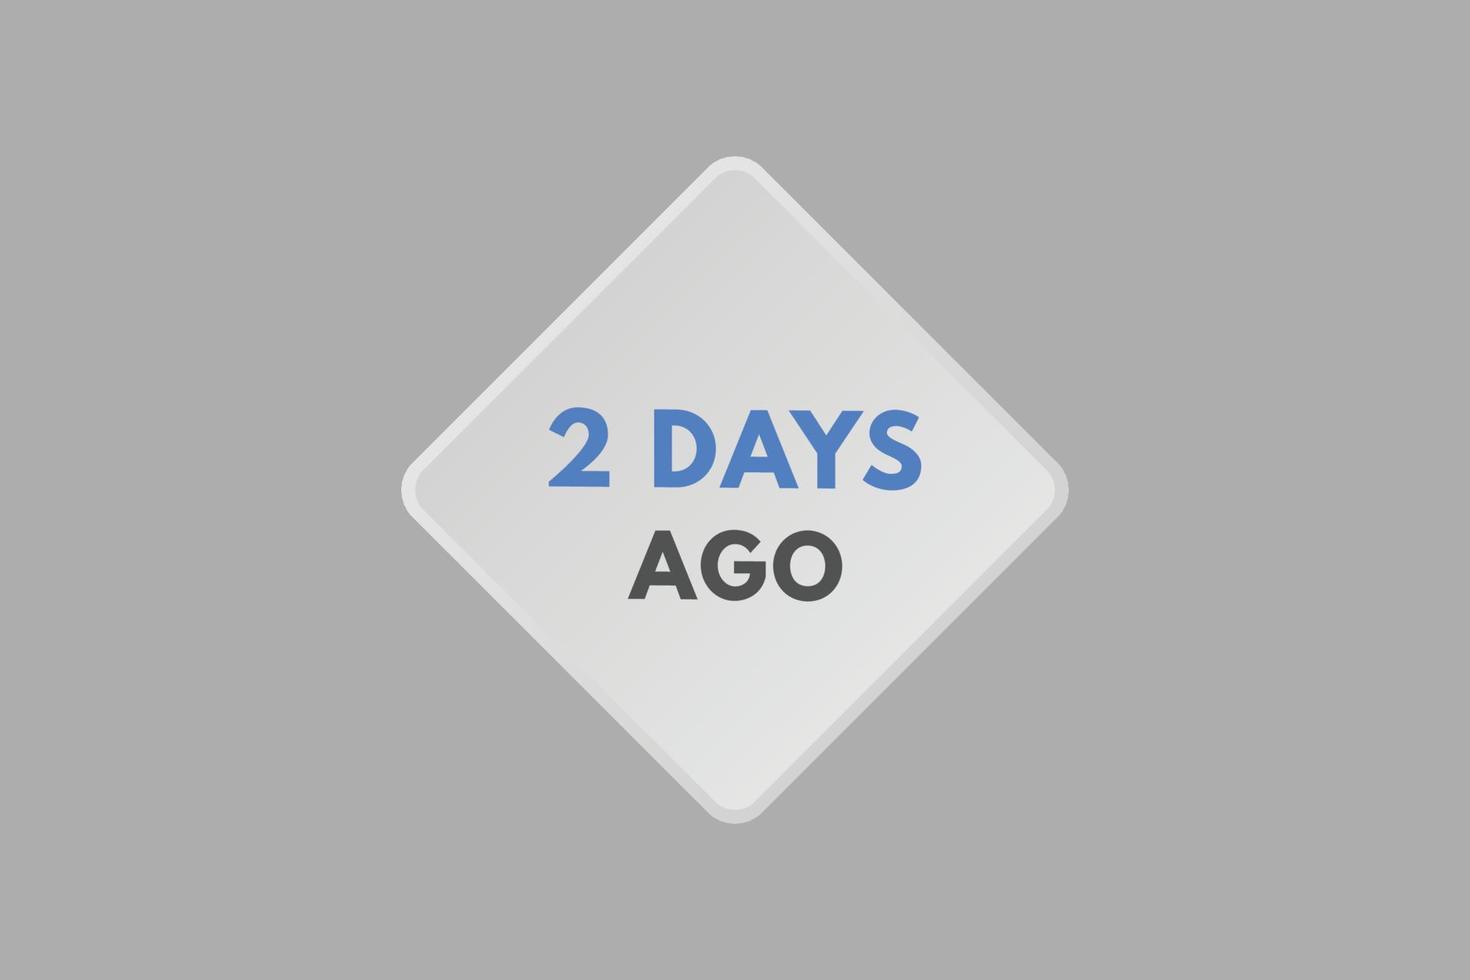 2 days ago text web button. two day ago banner label vector